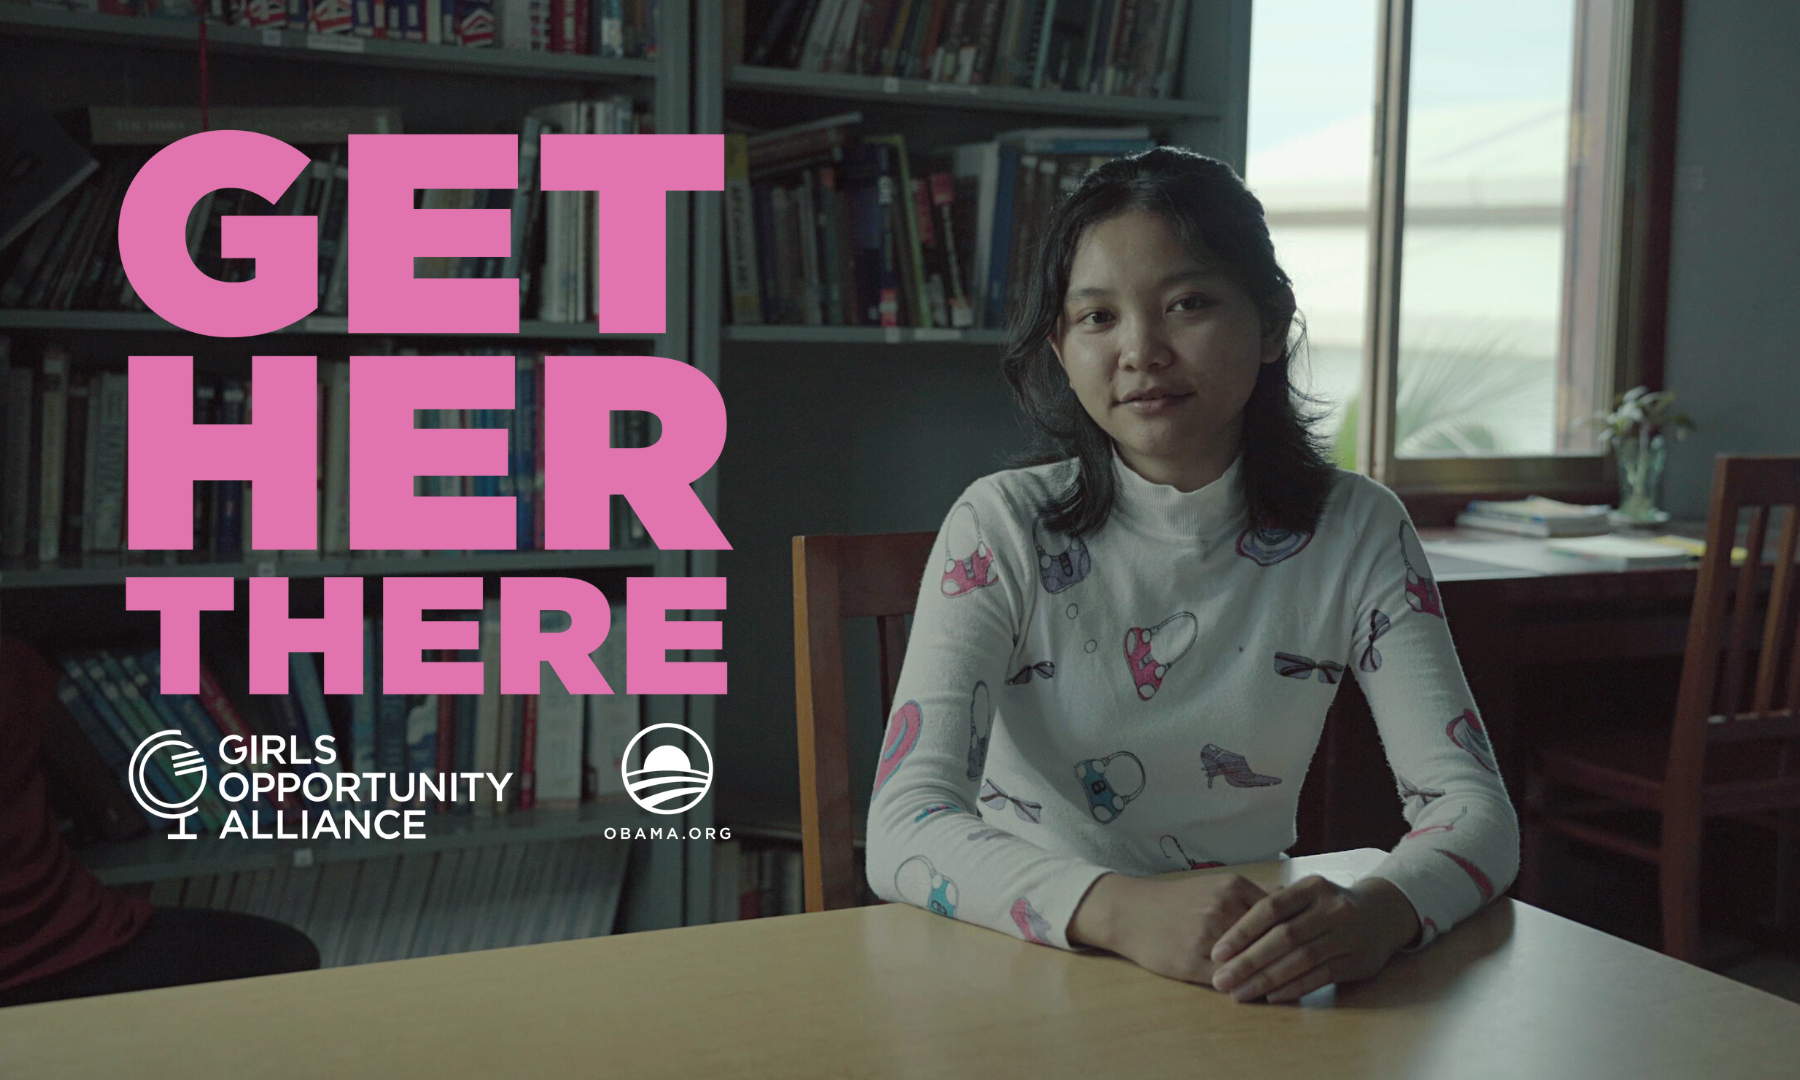 A young girl with light skin and dark, shoulder-length hair looks to camera with her arms crossed on the table in front of her. She sits in a classroom with books behind her. To her left, “Get Her There” is featured in pink lettering with the Girls Opportunity Alliance and Obama Foundation logos below.